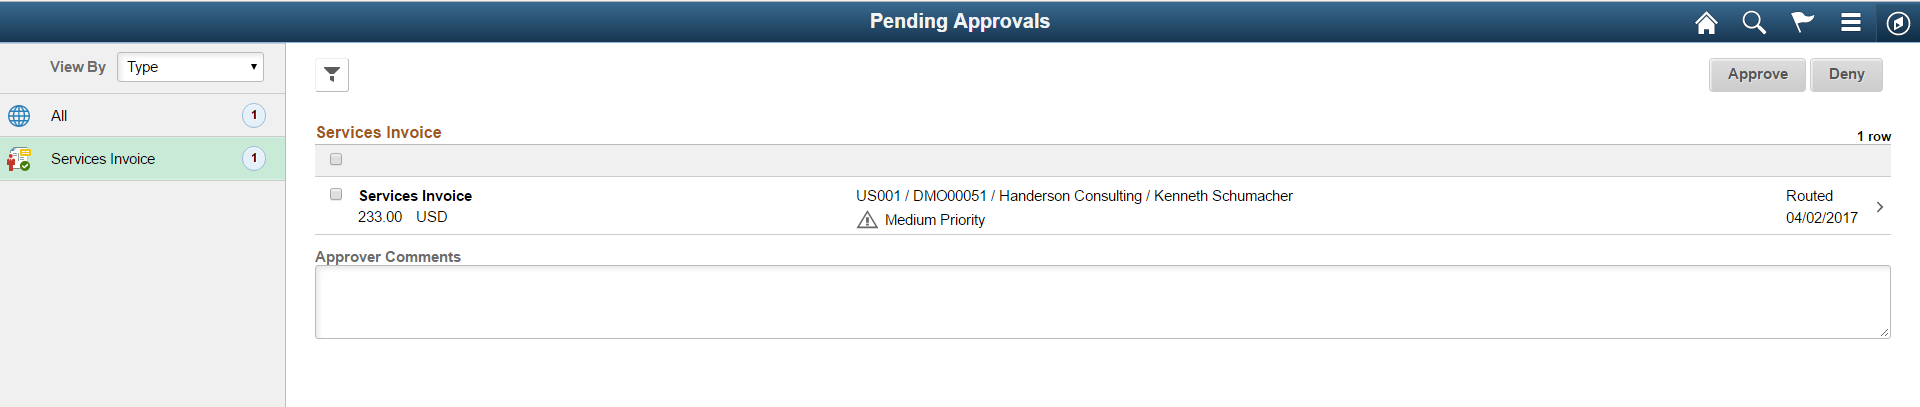 Pending Approvals - Services Invoice list page